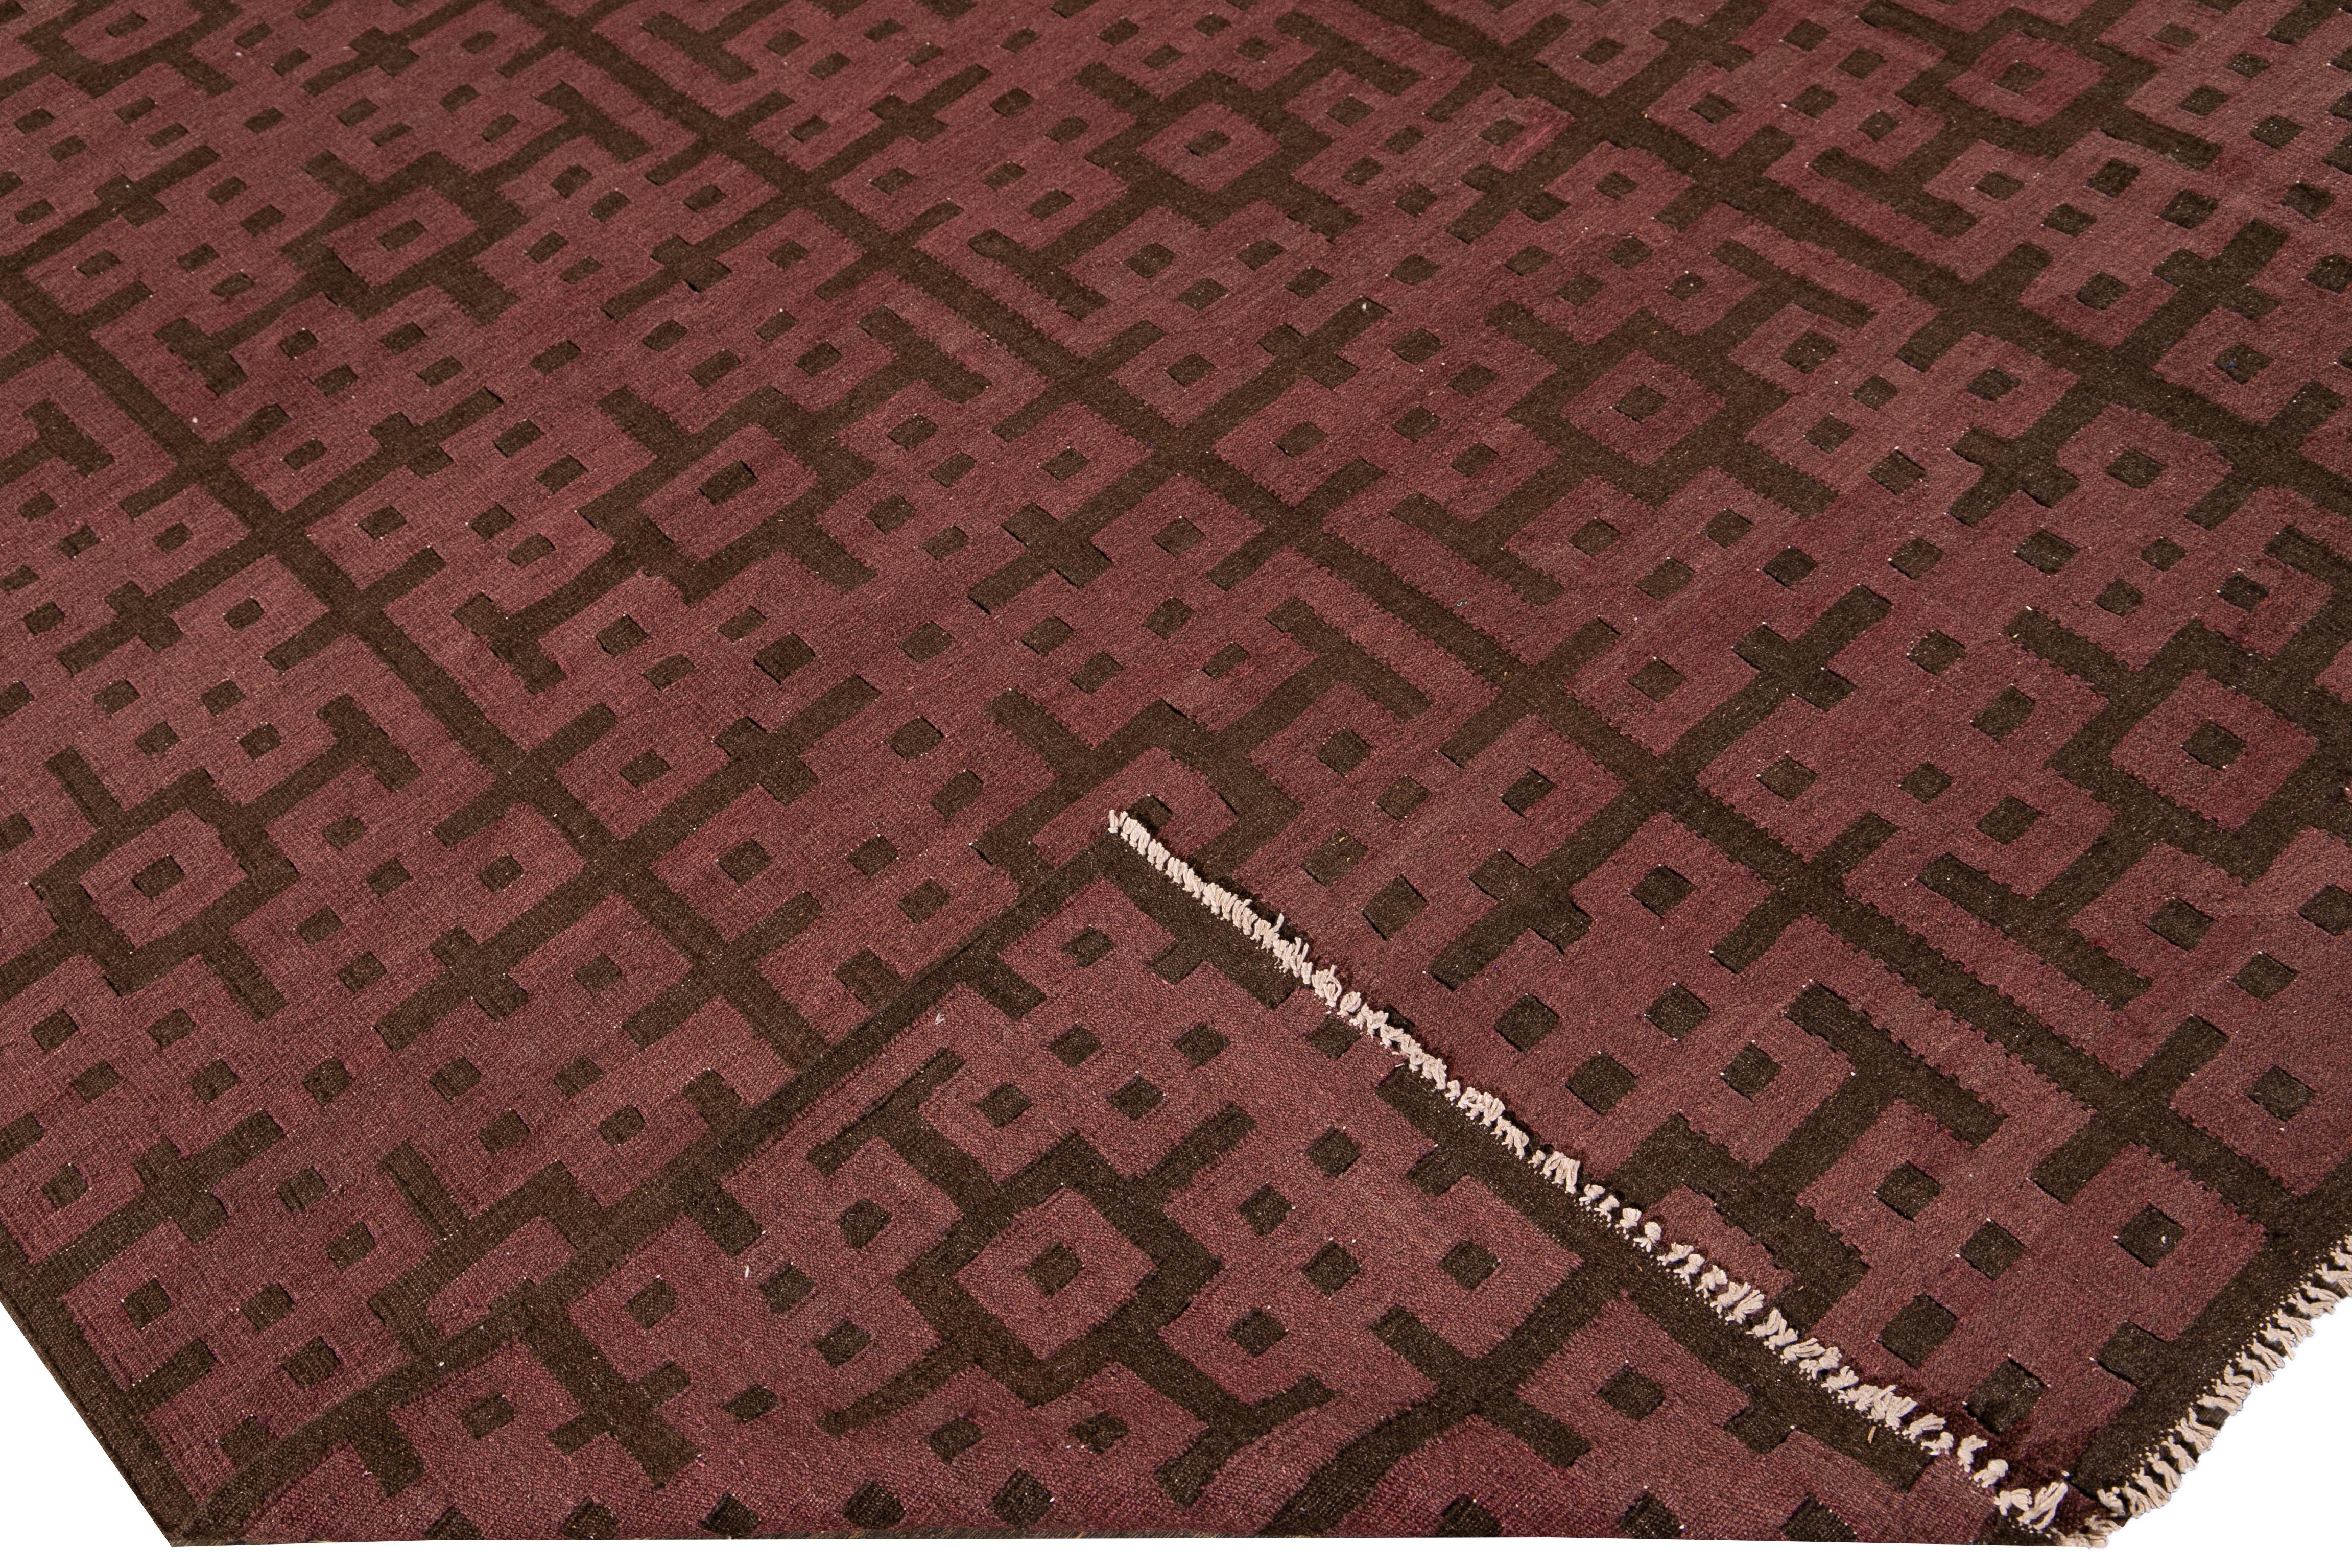 Beautiful modern Kilim flat-weave wool rug with a marron field. This piece of art has brown accents in a gorgeous geometric pattern design.

This rug measures: 9'10